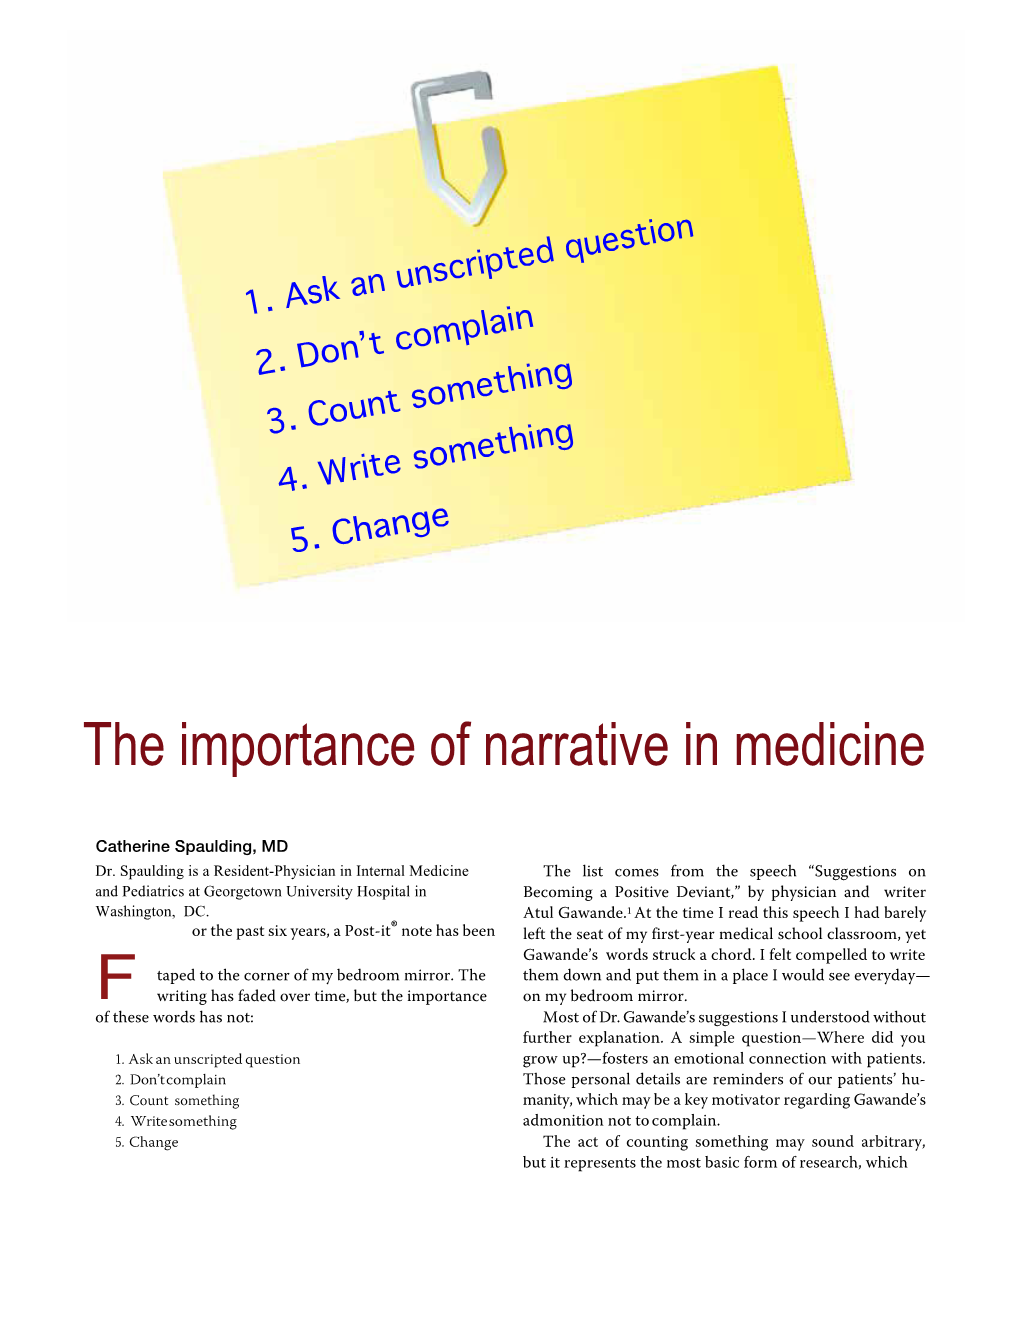 The Importance of Narrative in Medicine